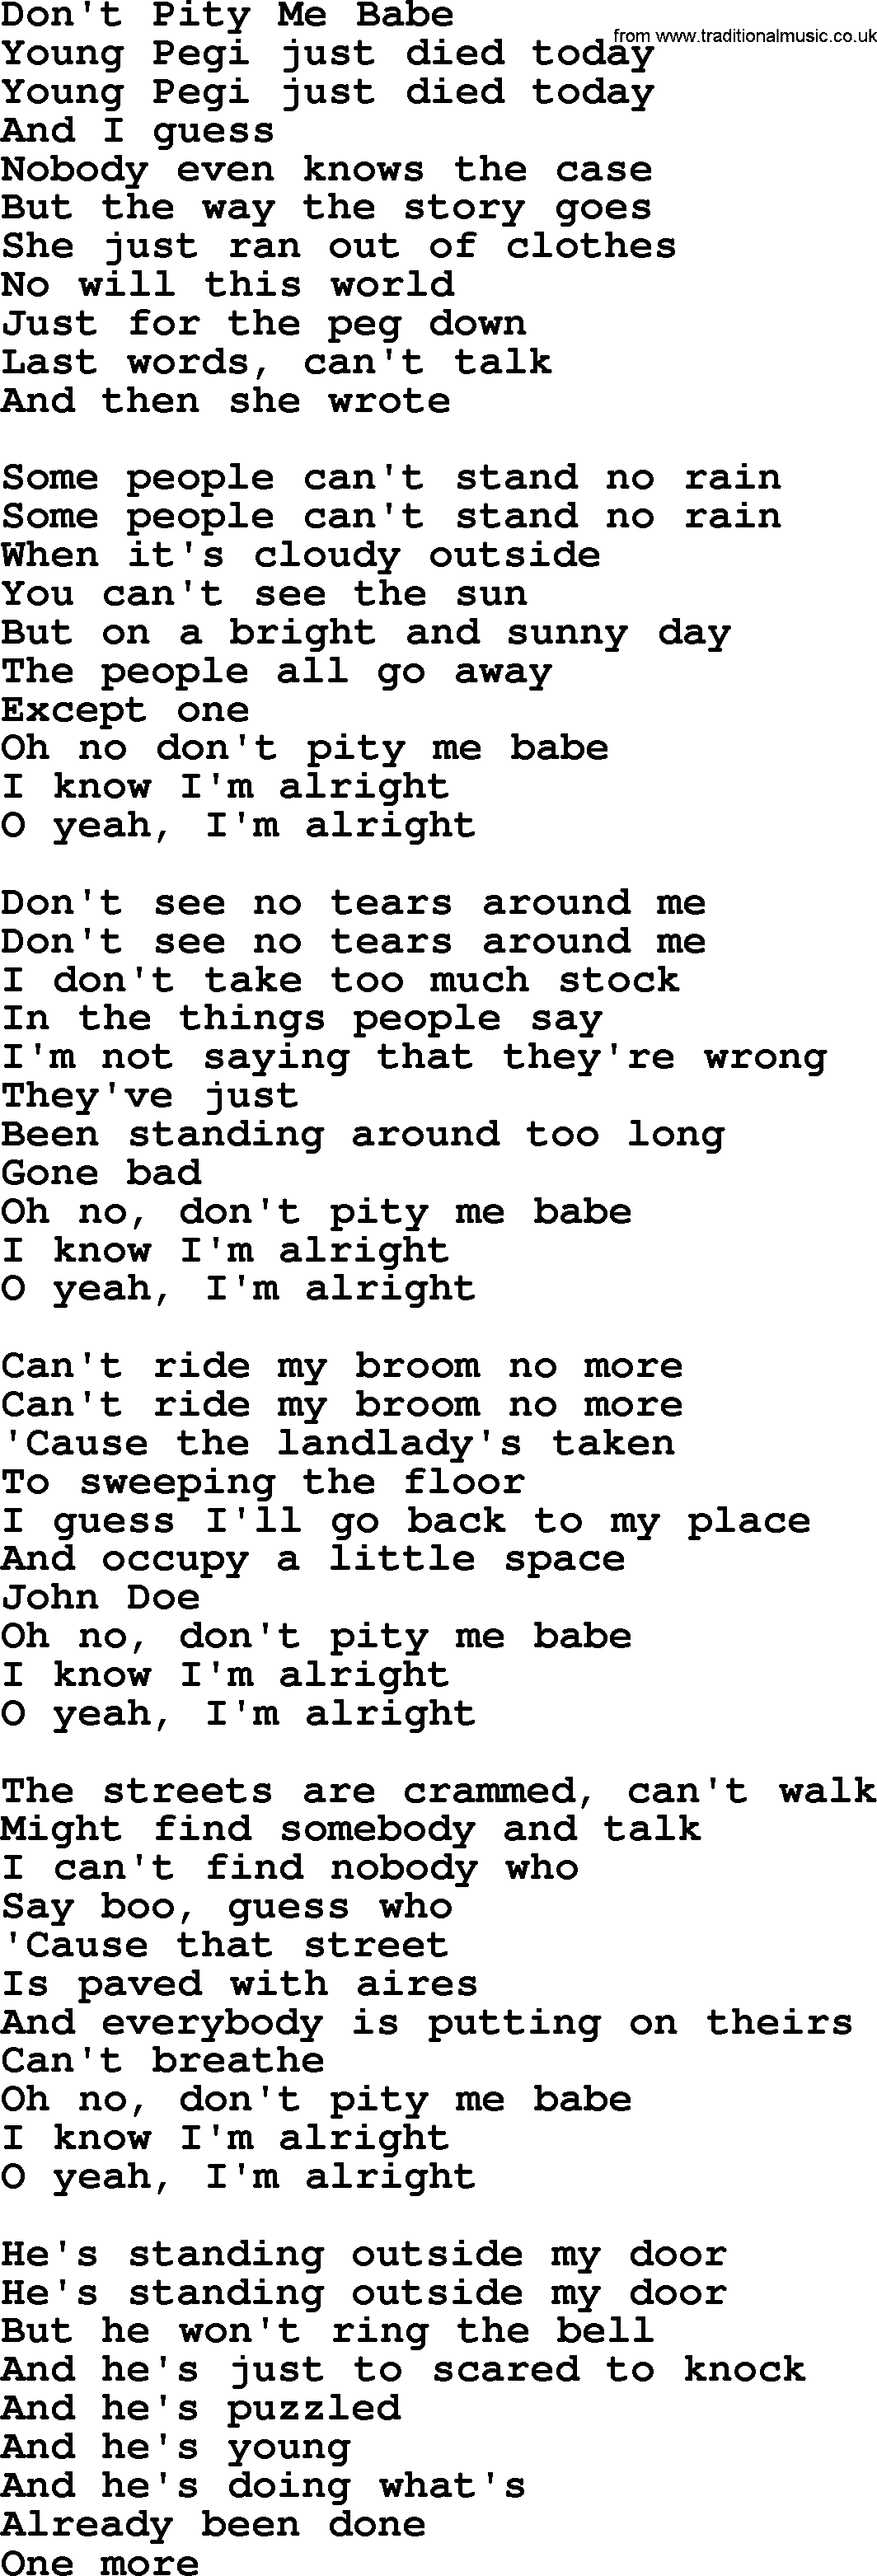 The Byrds song Don't Pity Me Babe, lyrics